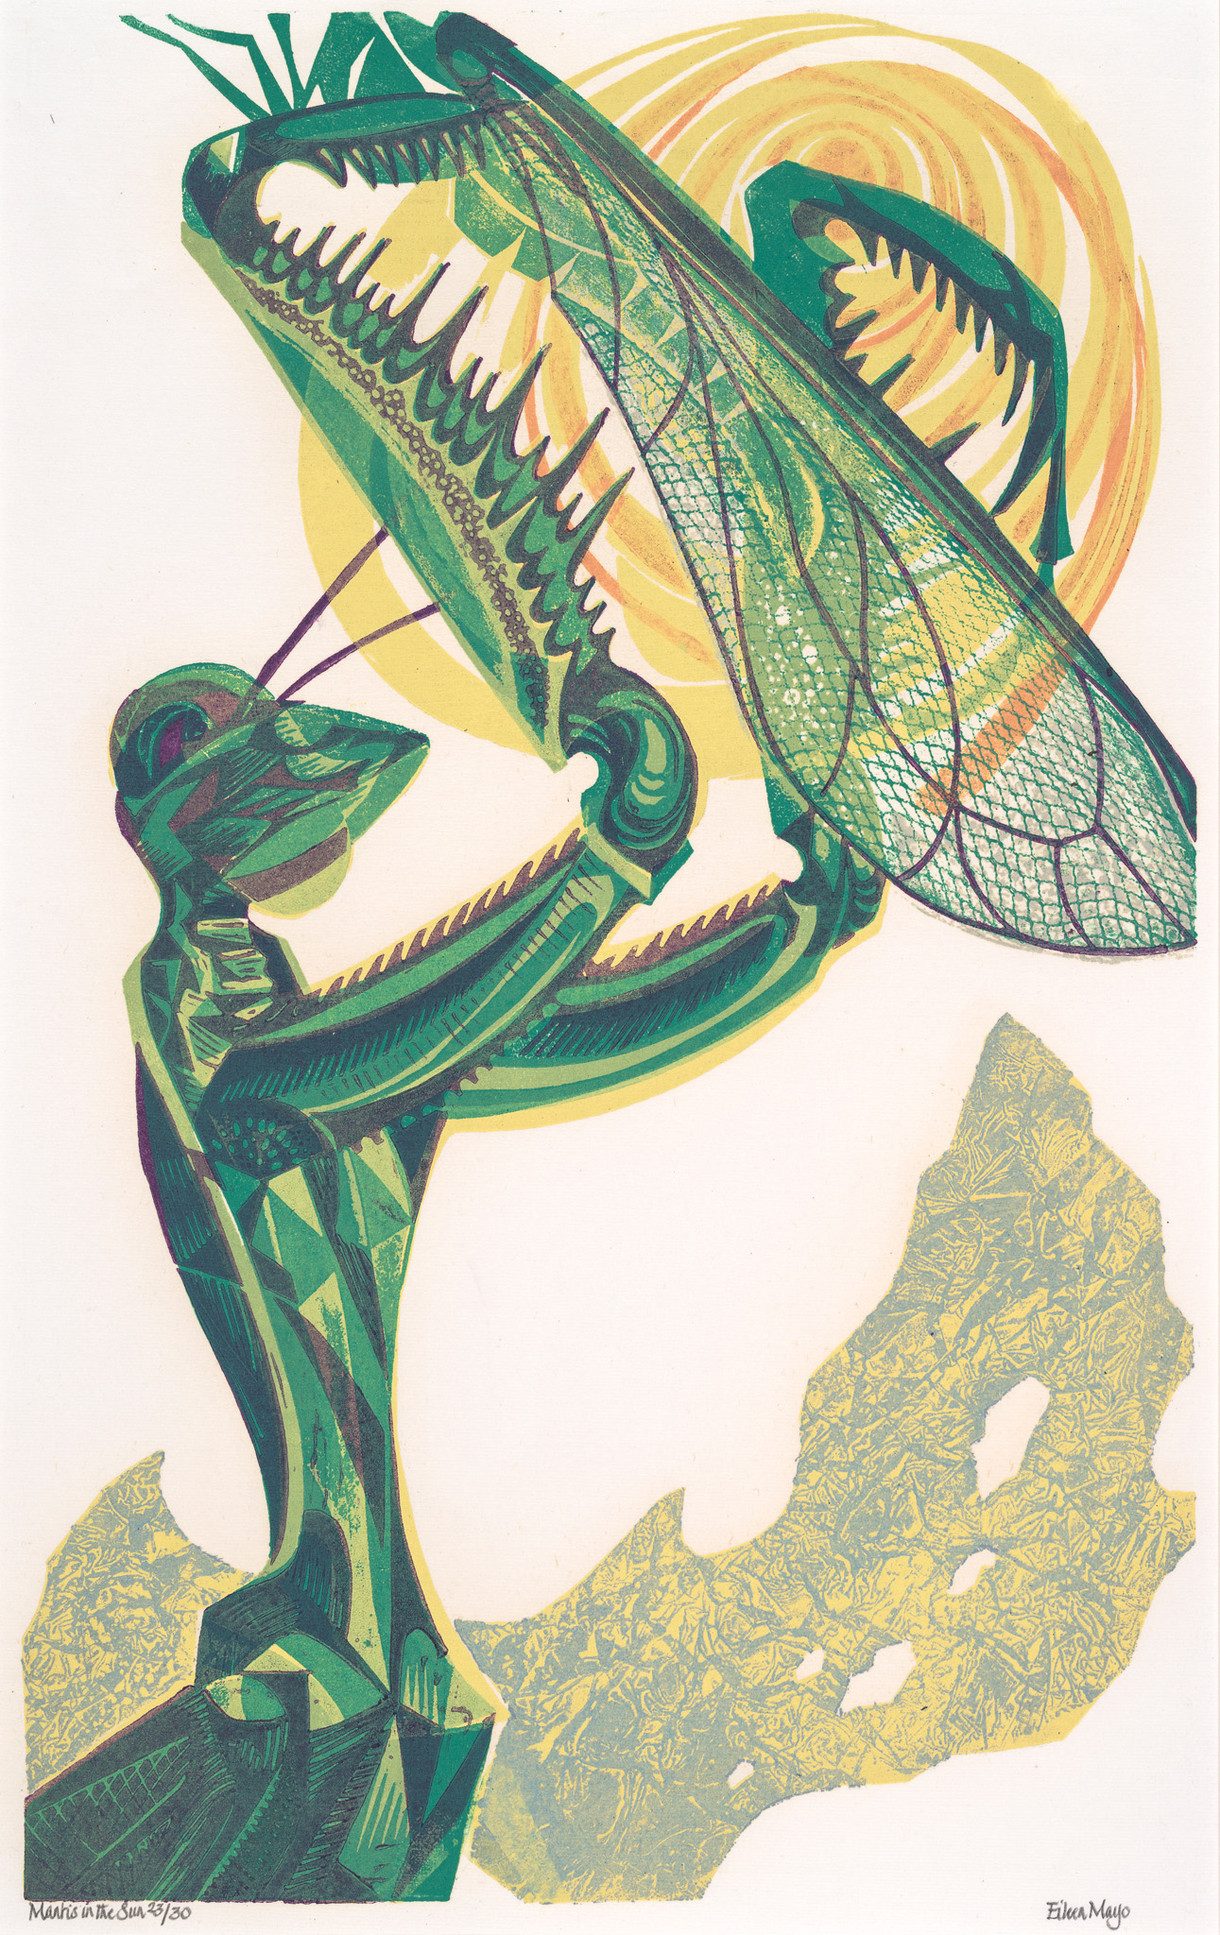 Colouring in: Mantis in the Sun